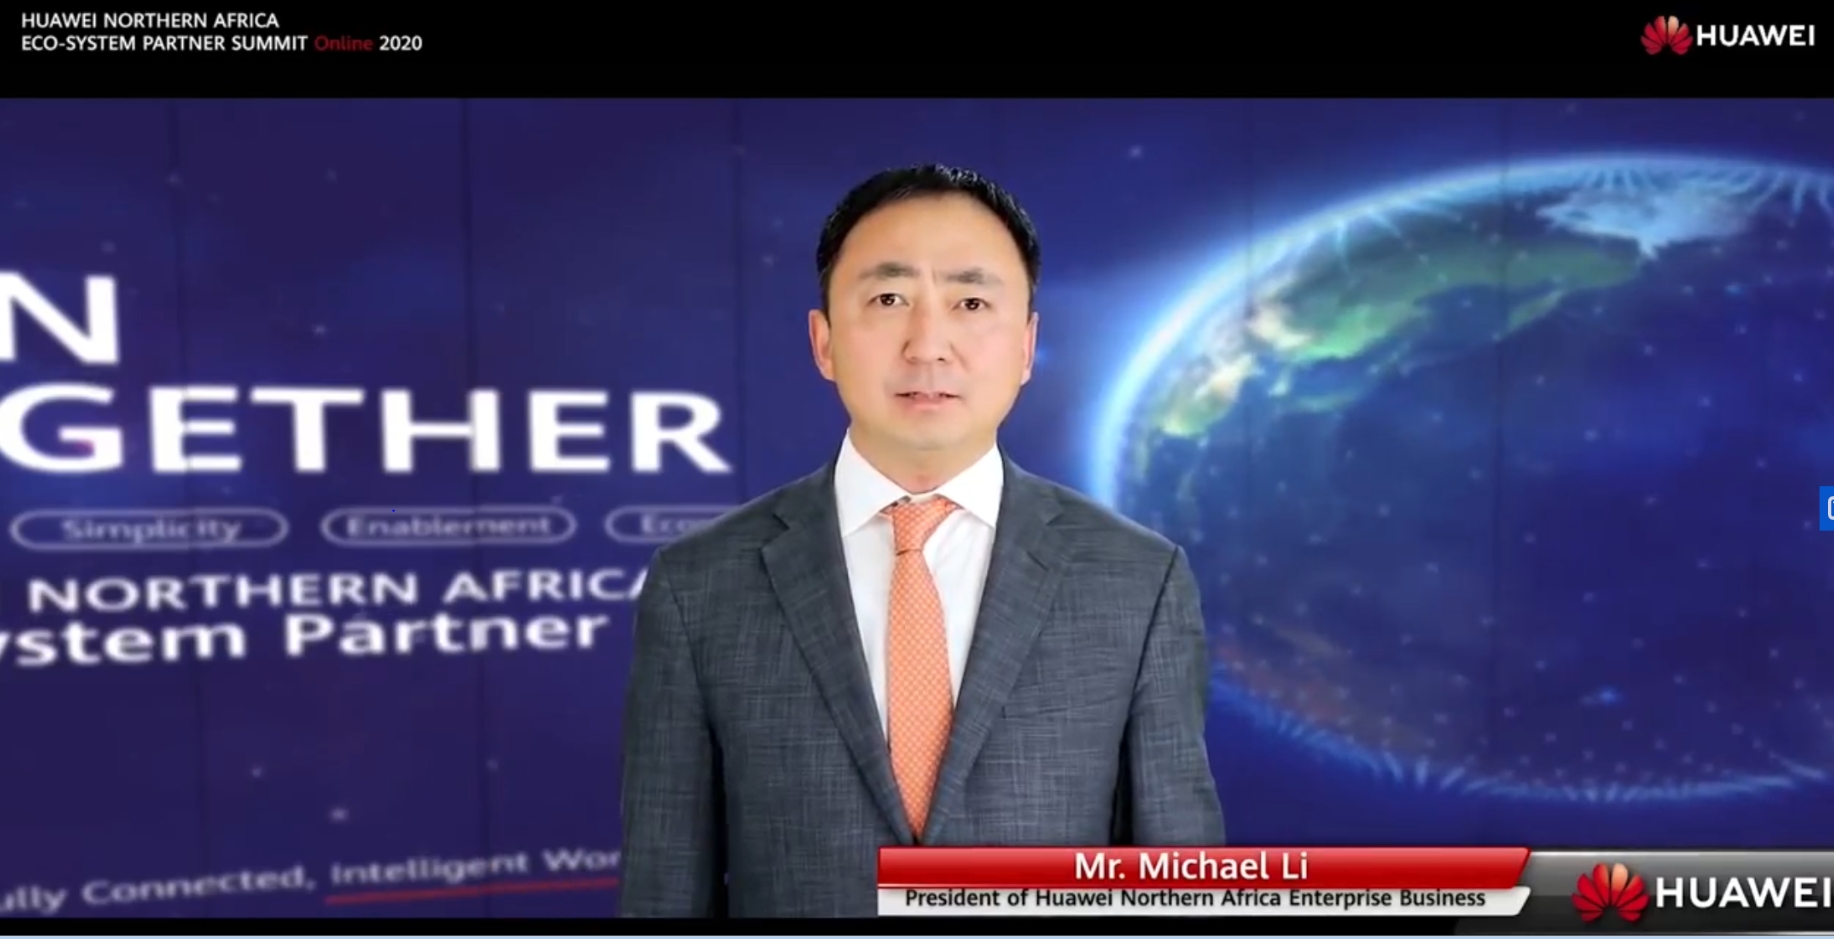 Huawei Northern Africa accueille le Sommet « Ecosystem Partner 2020 »